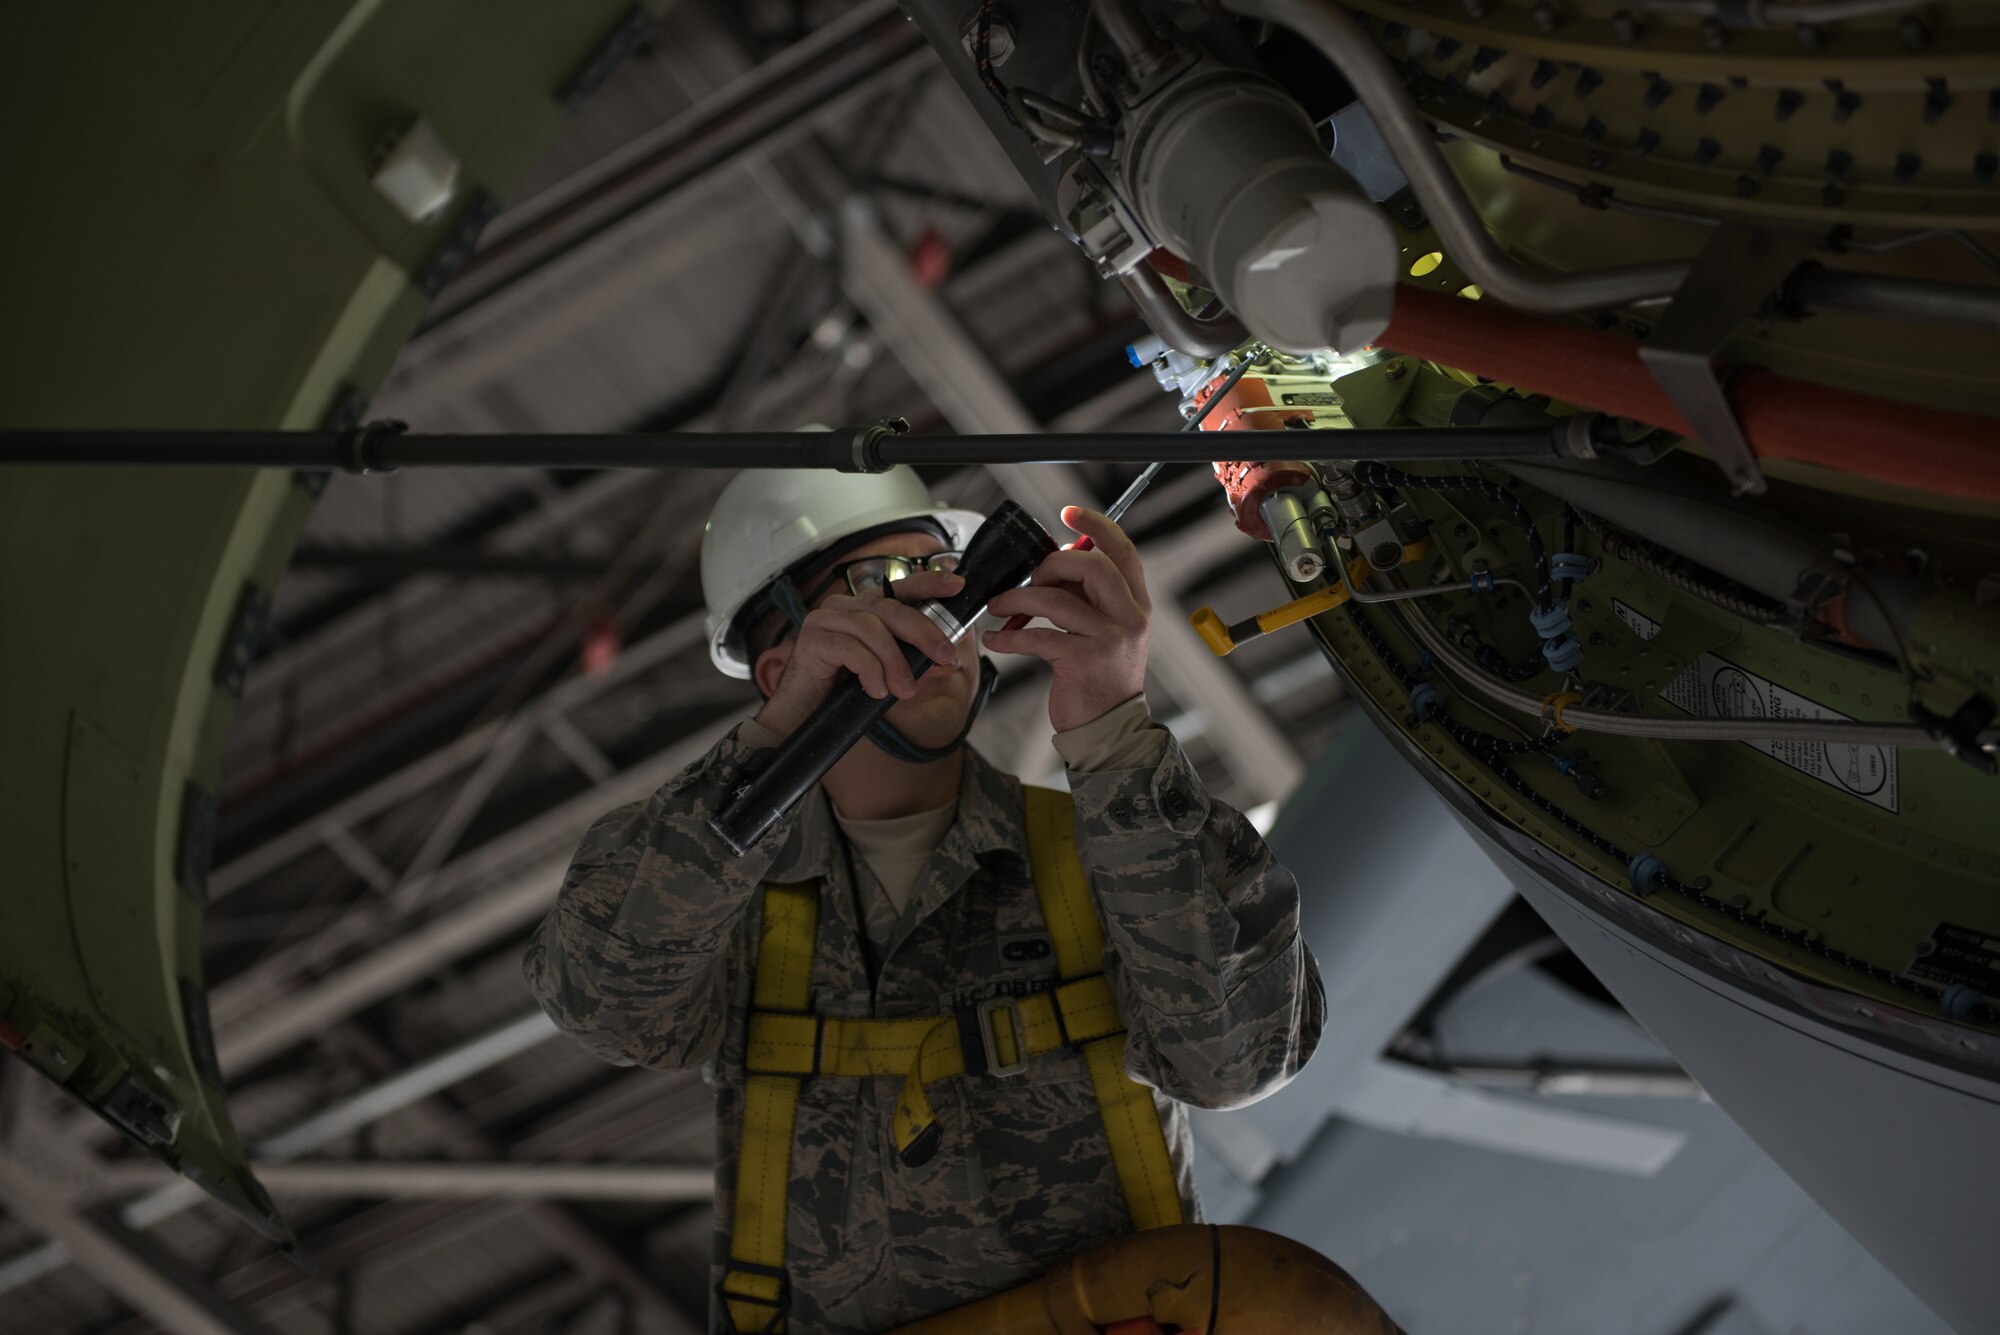 U.S. Air Force Senior Airman Matthew Malich, 60th Aircraft Maintenance Squadron aerospace propulsion journeyman, inspects a C-5M Super Galaxy Jan. 28, 2019 at Travis Air Force Base, Calif. Regular maintenance ensures the C-5 is mission ready and the 60th Maintenance Group's Maintenance Operations Center coordinates all maintenance actions at Travis. (U.S. Air Force photo by Tech. Sgt. James Hodgman)